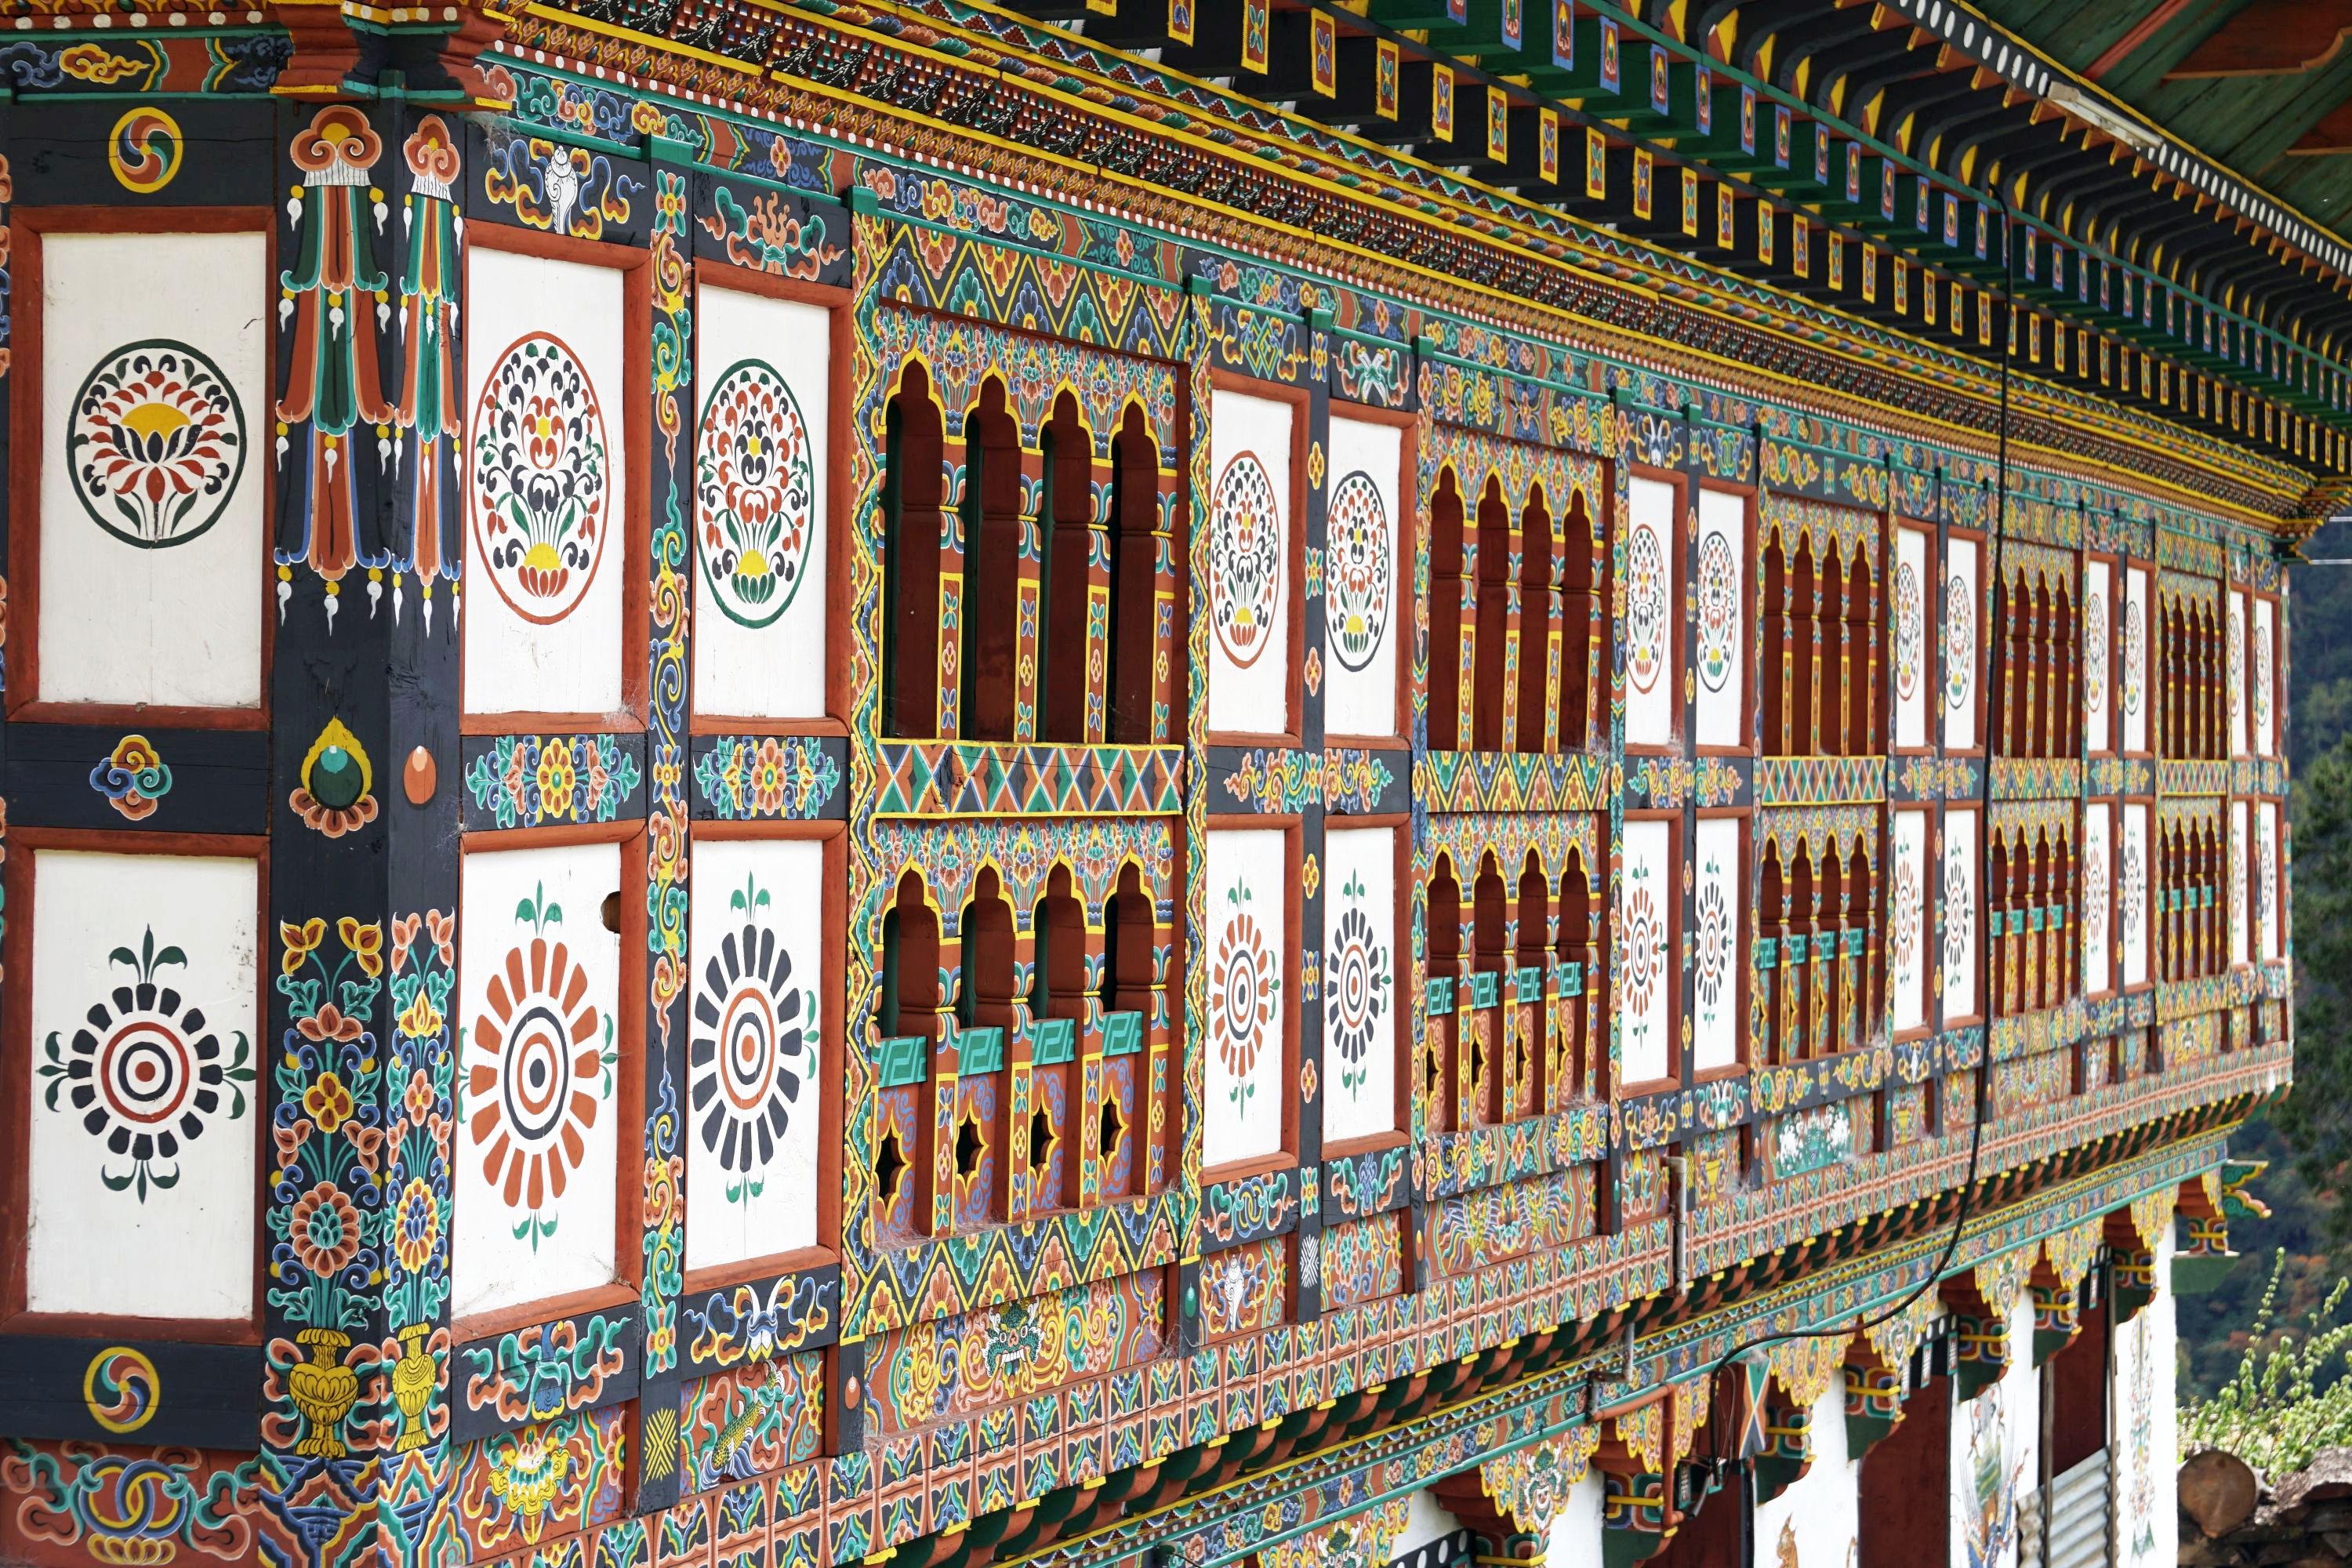 Things I learnt about Bhutan